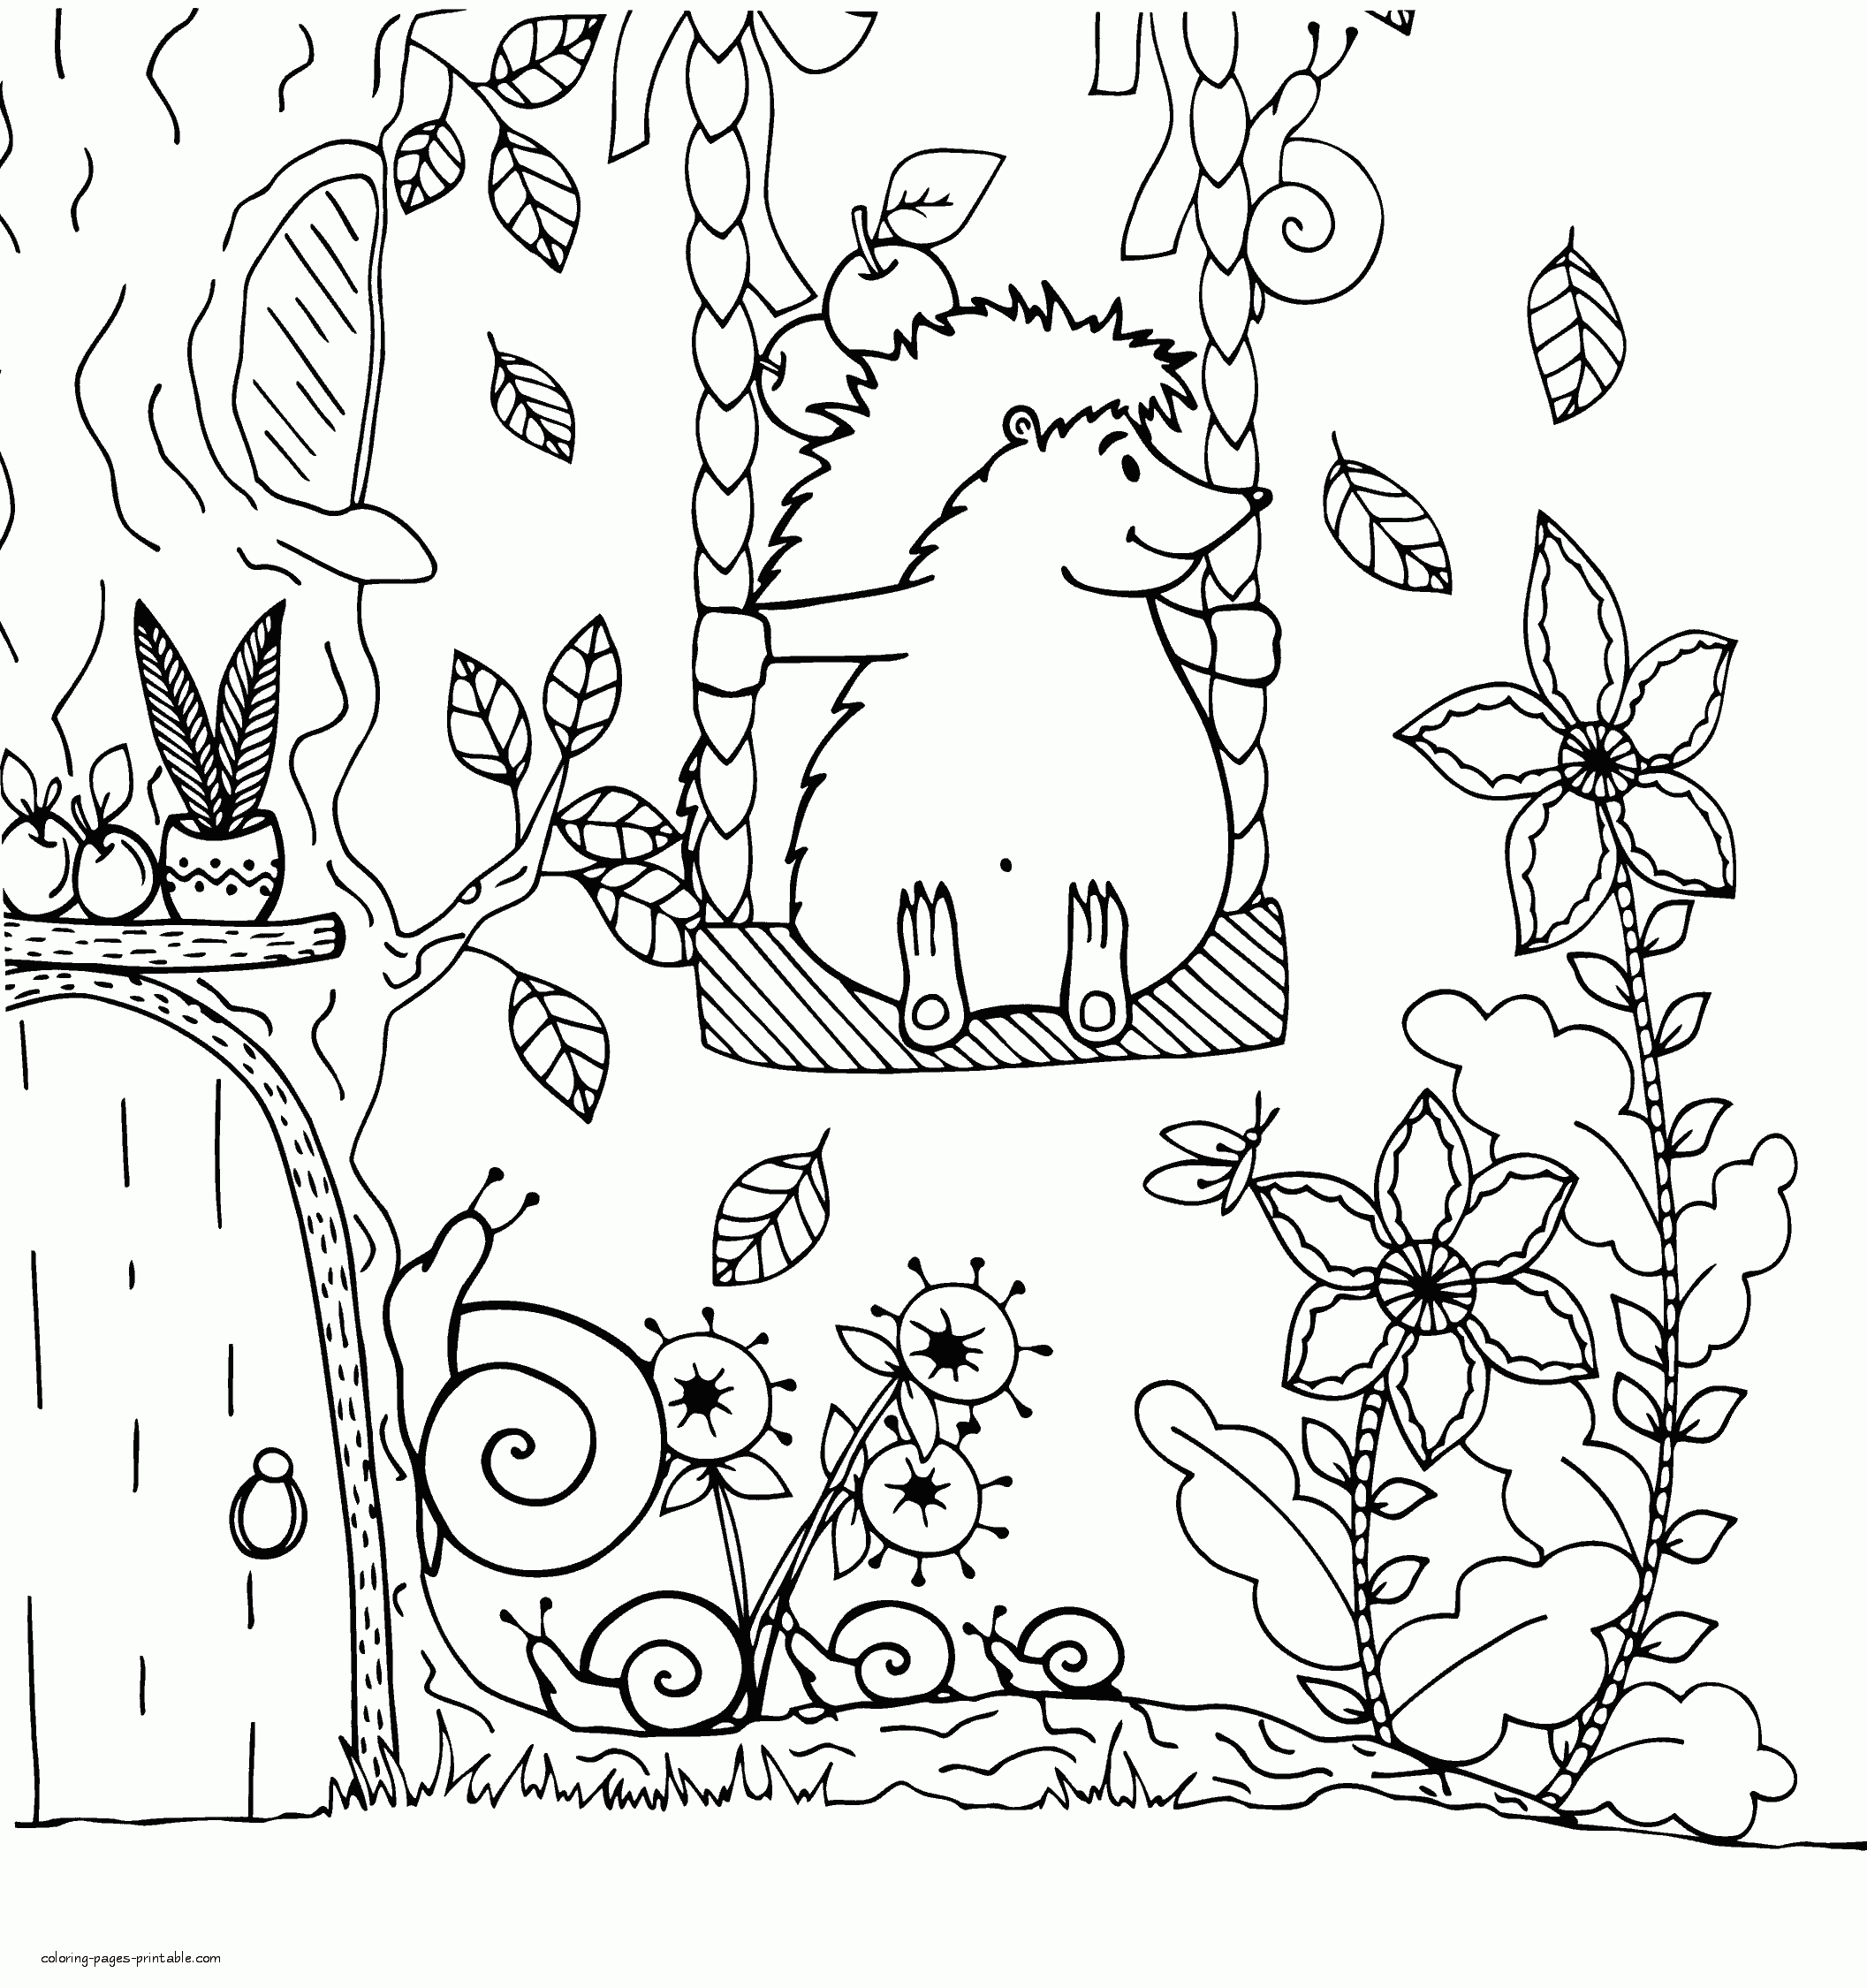 Printable Hedgehog Coloring Page For Adults Coloring Pages